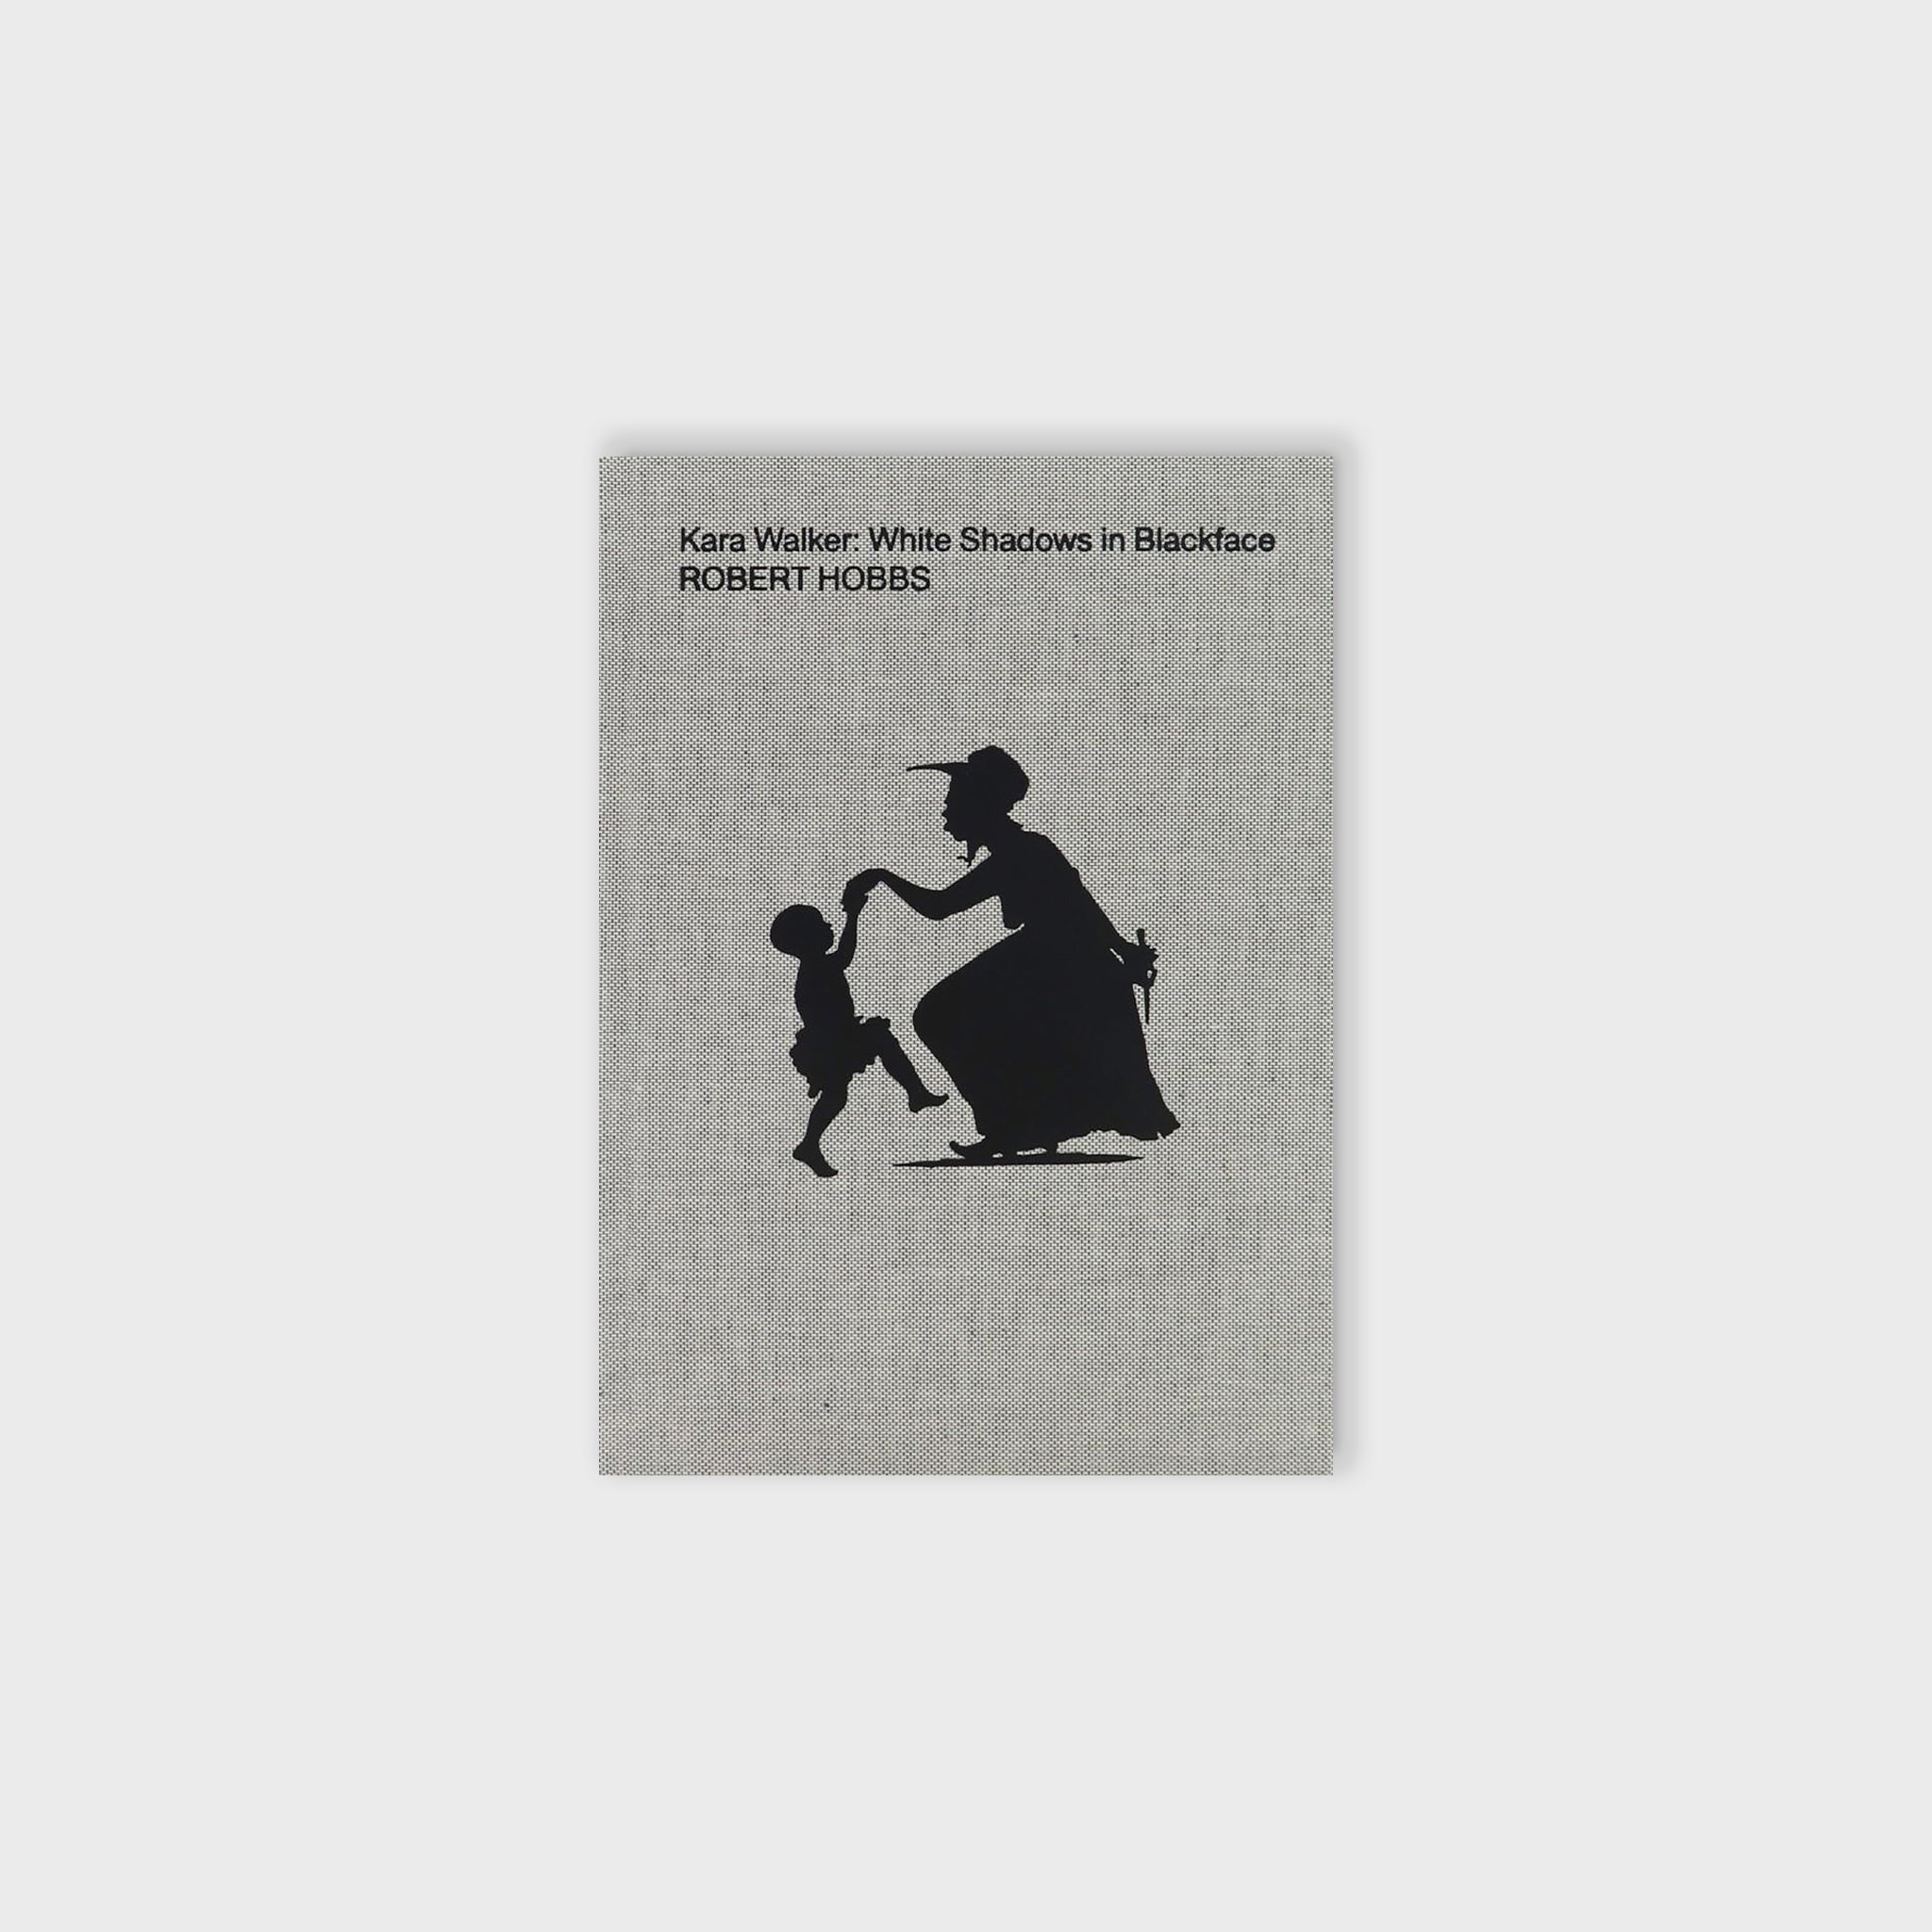 Fabric textured cover of Kara Walker's White Shadows in Blackface featuring a black silhouette of figures dancing.